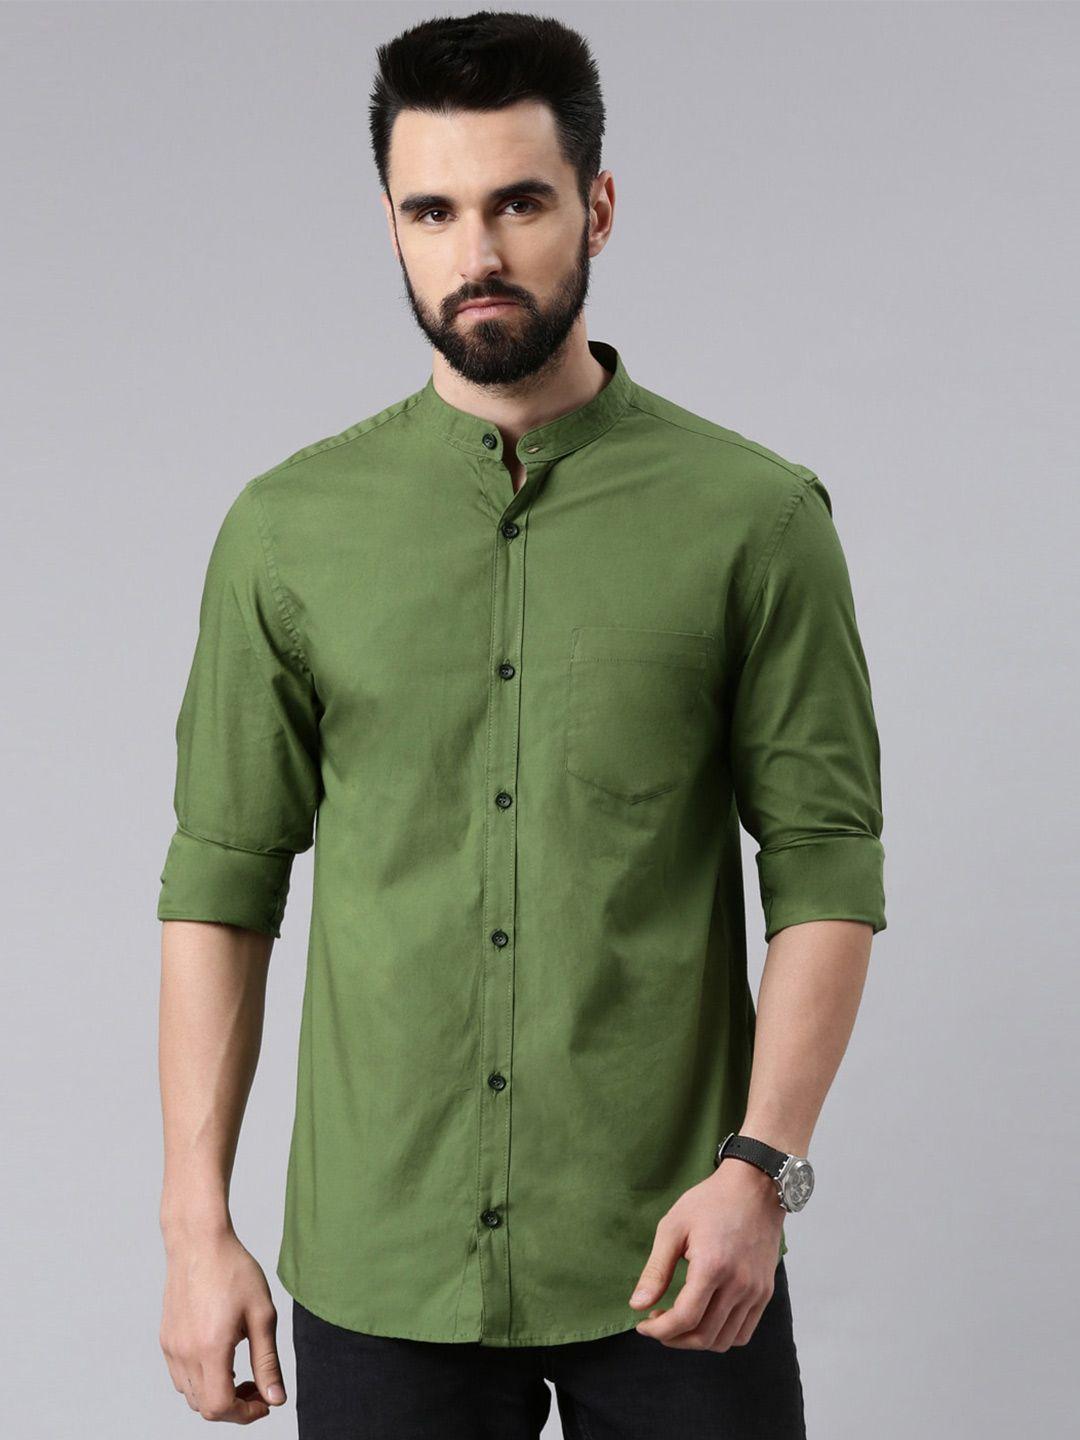 the soul patrol smart slim fit band collar cotton casual shirt